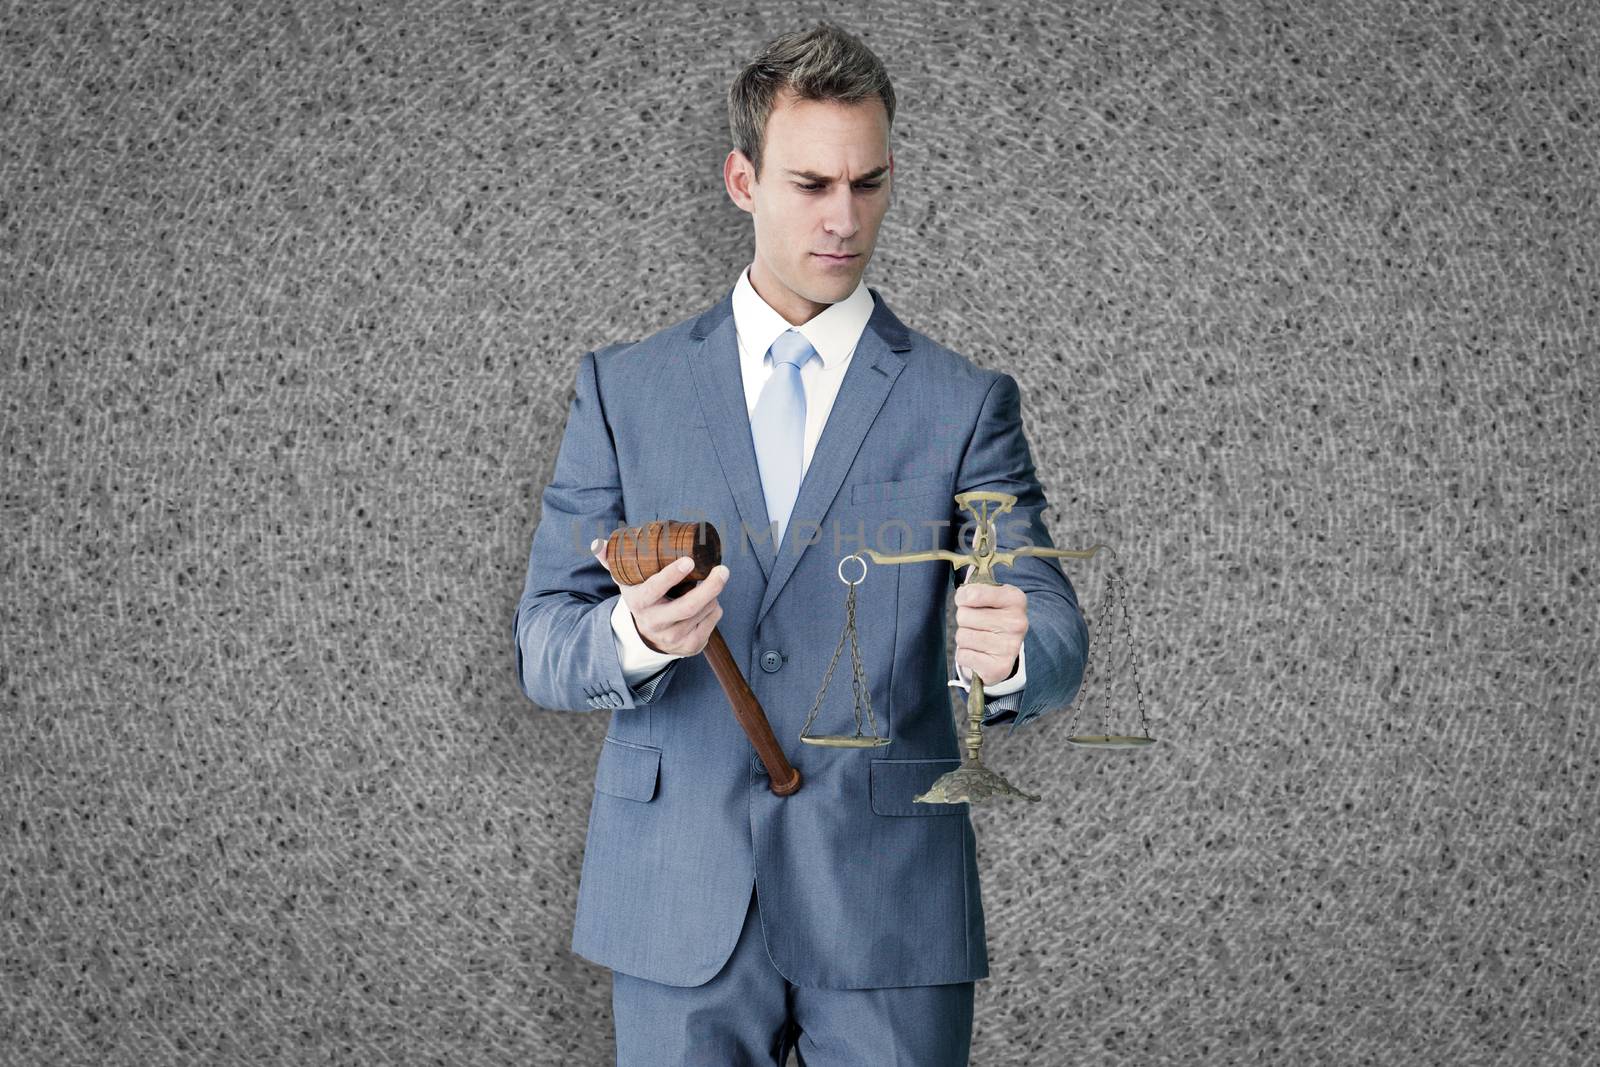 Businessman holding scales of justice against grey background